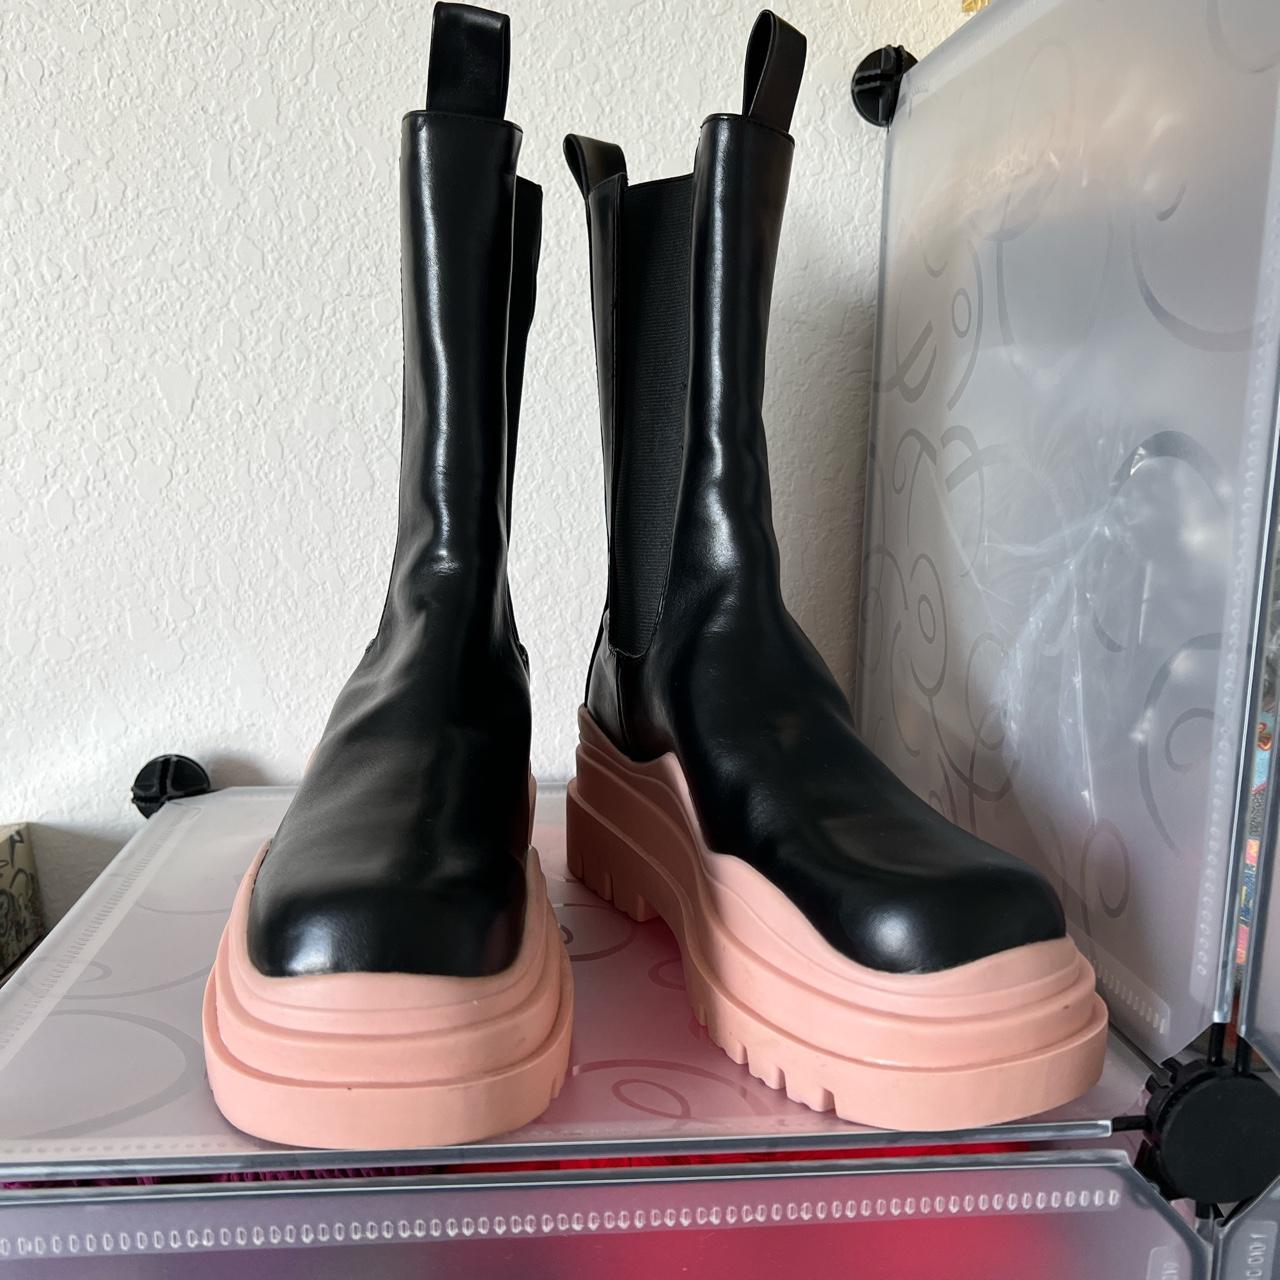 Product Image 2 - Chunky sole boots pink, very